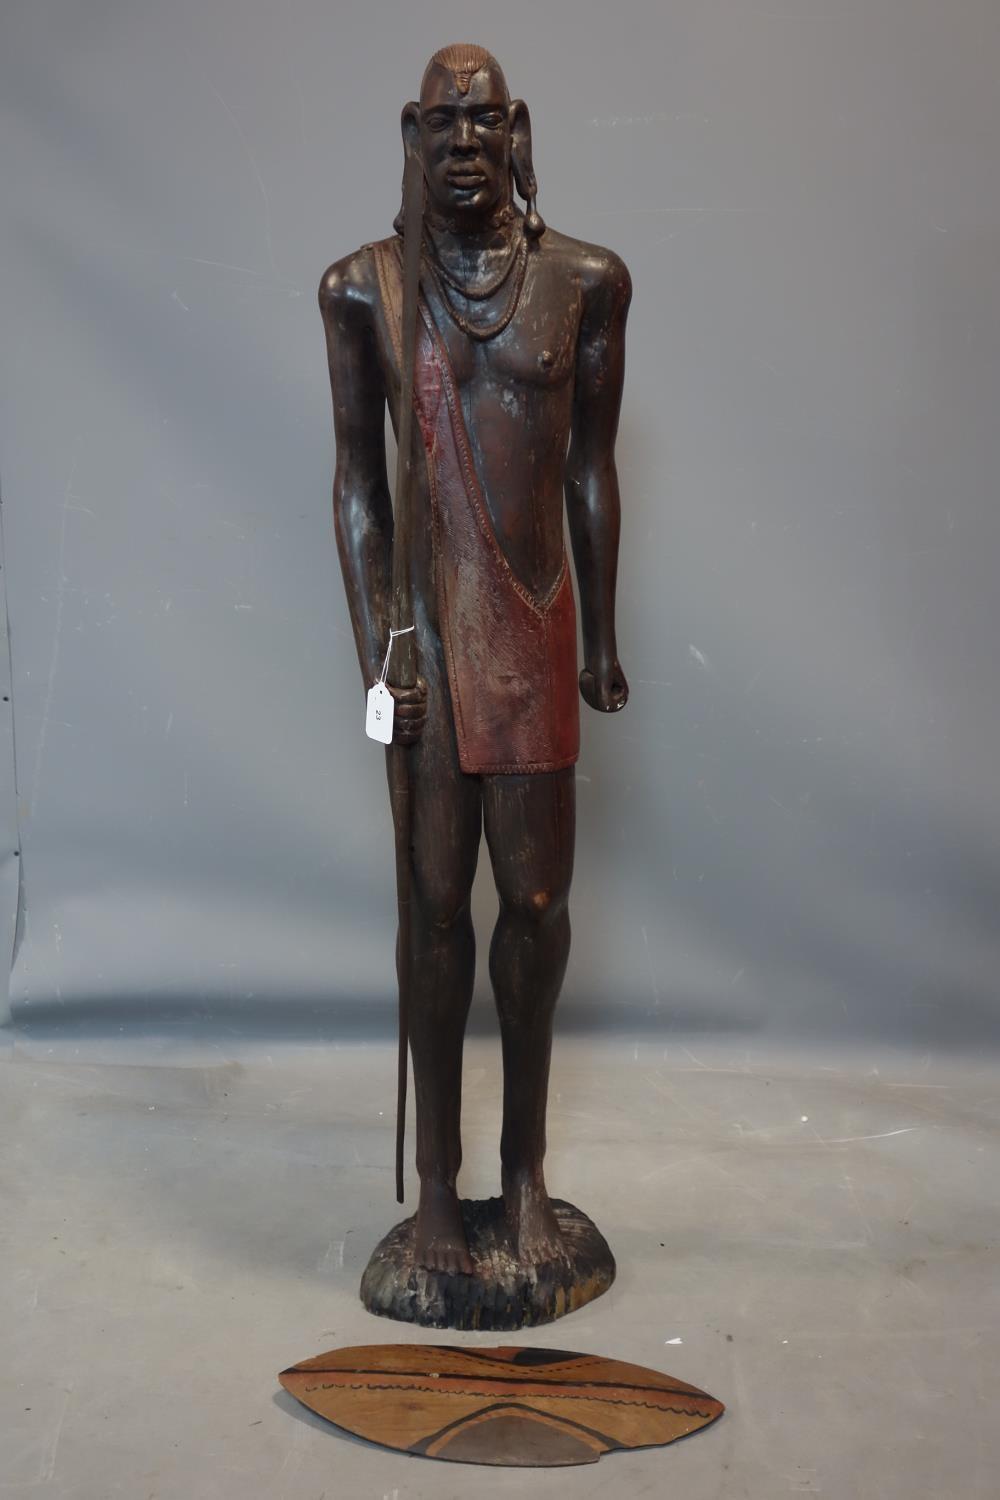 An African wooden carving of a Maasai warrior, carrying wooden spear and with shield (shield